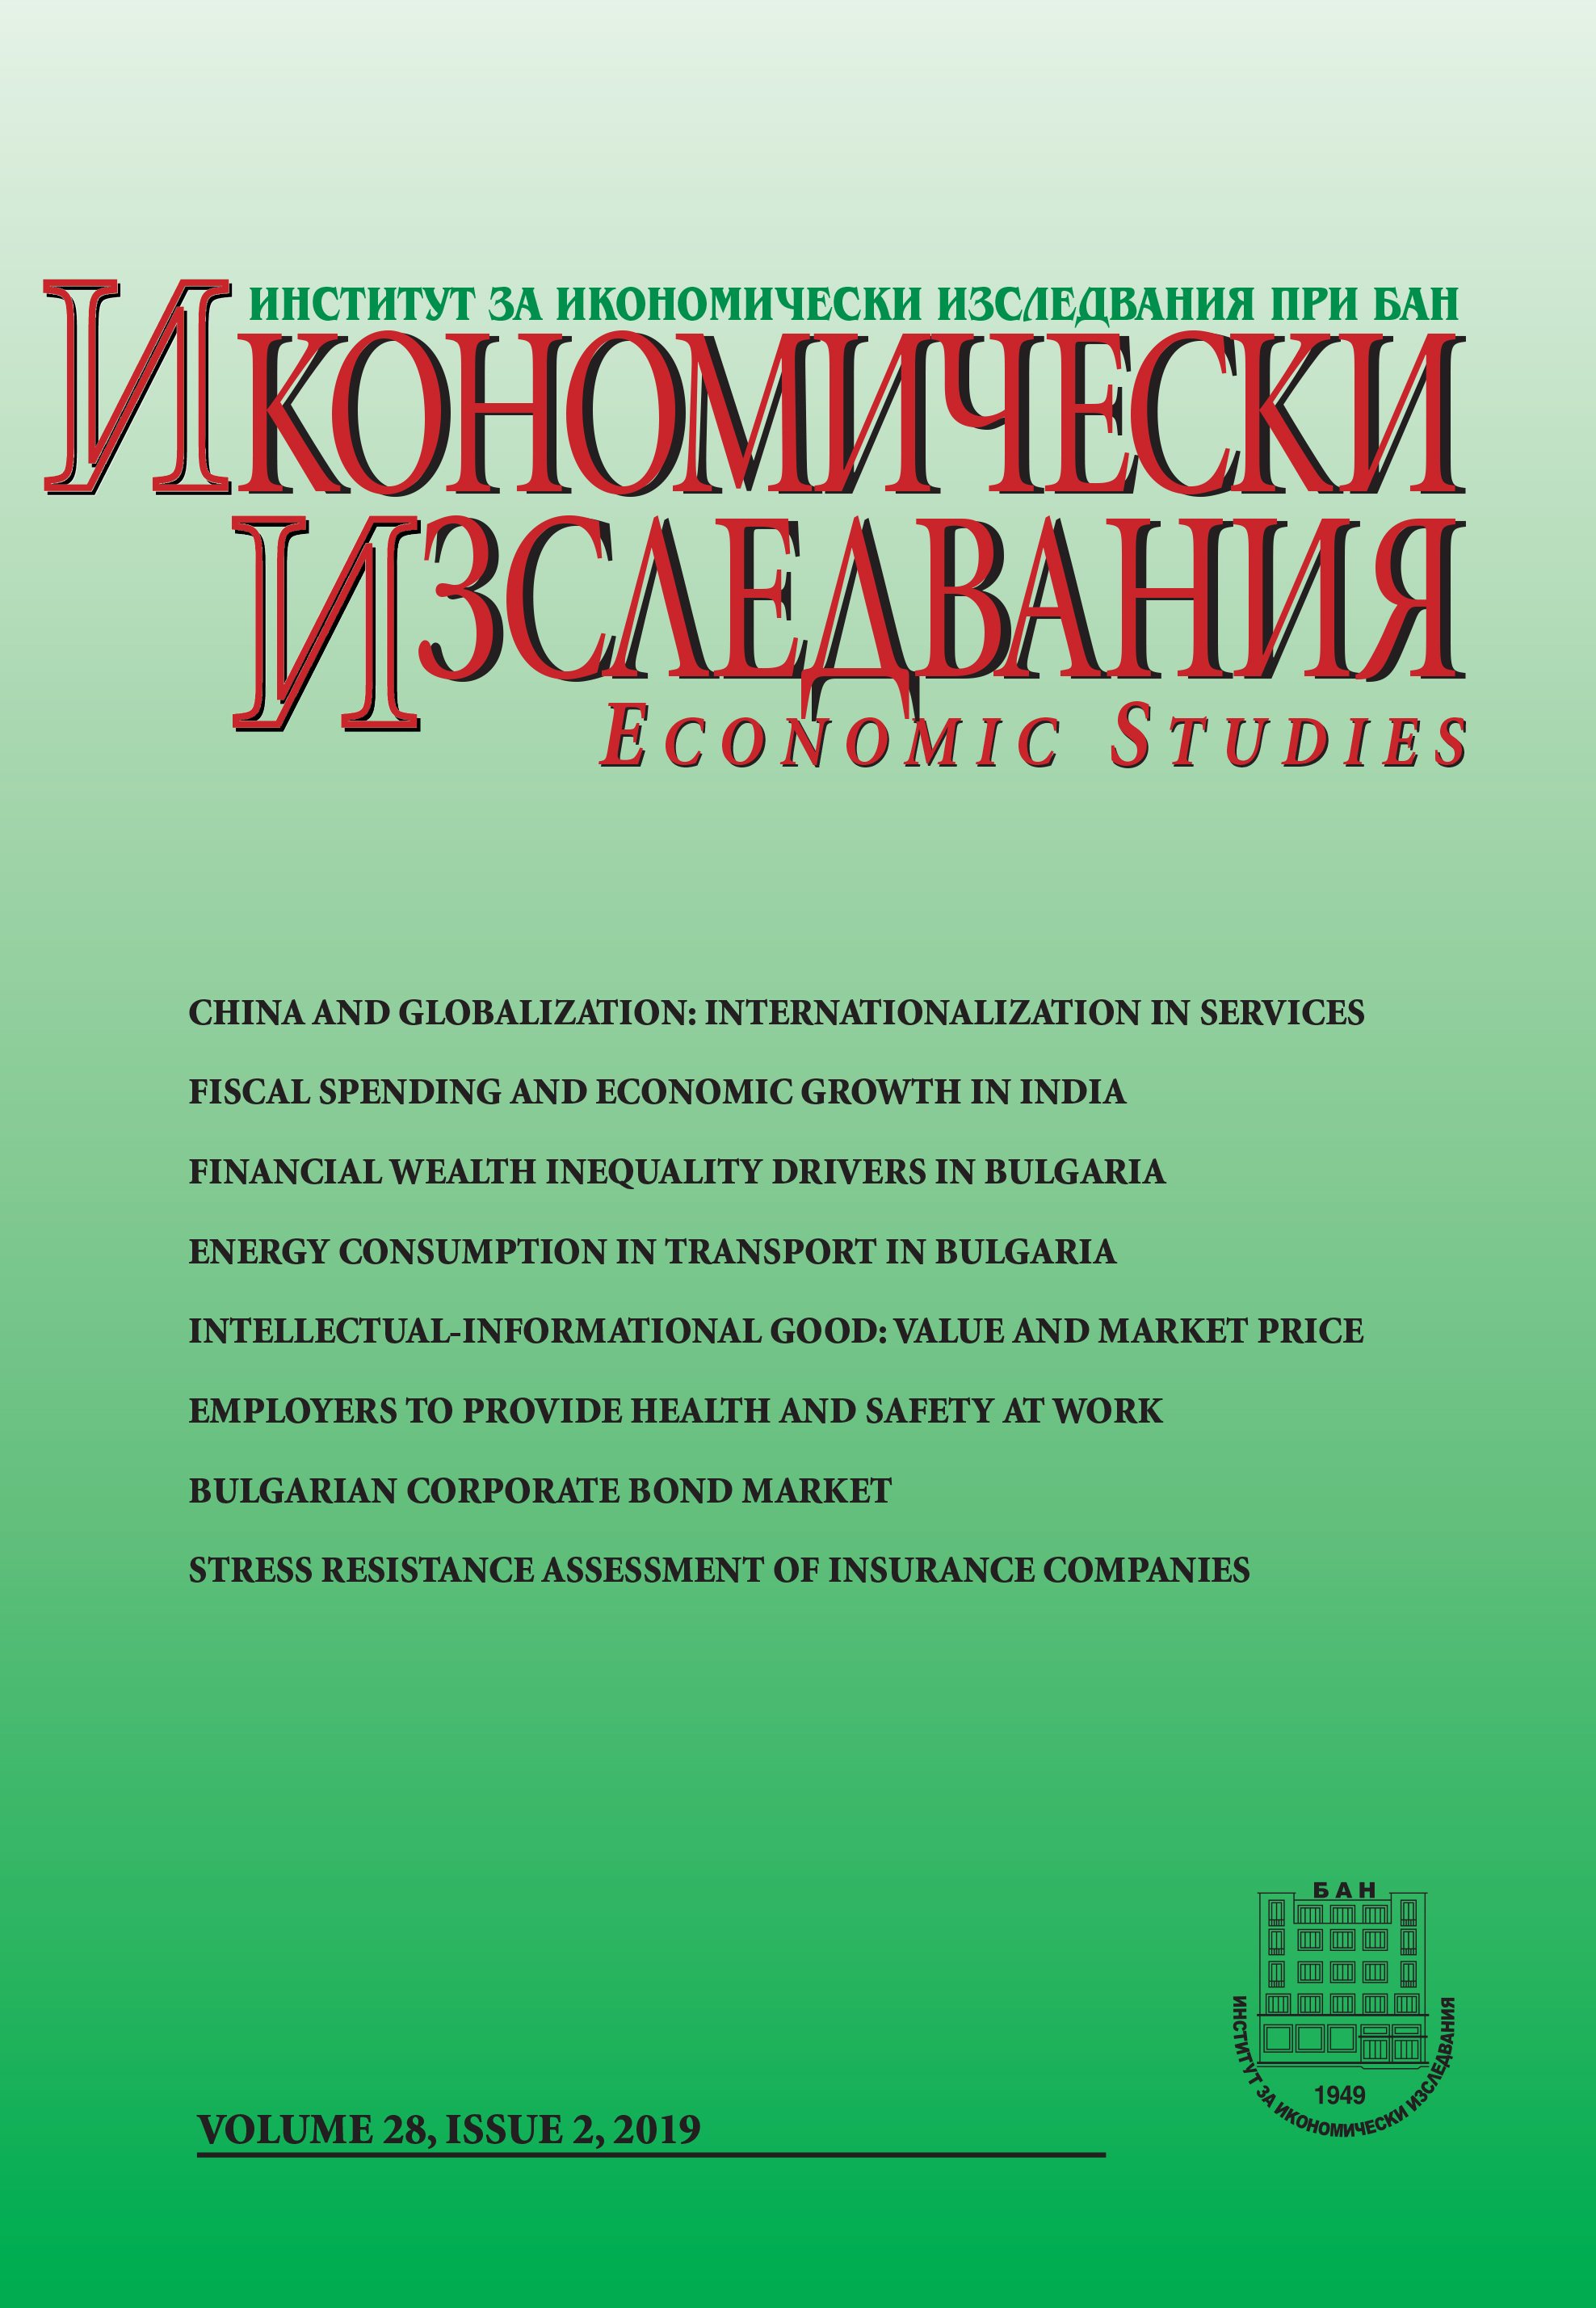 Energy Consumption in the Transport in Bulgaria in the Contemporary Conditions Cover Image